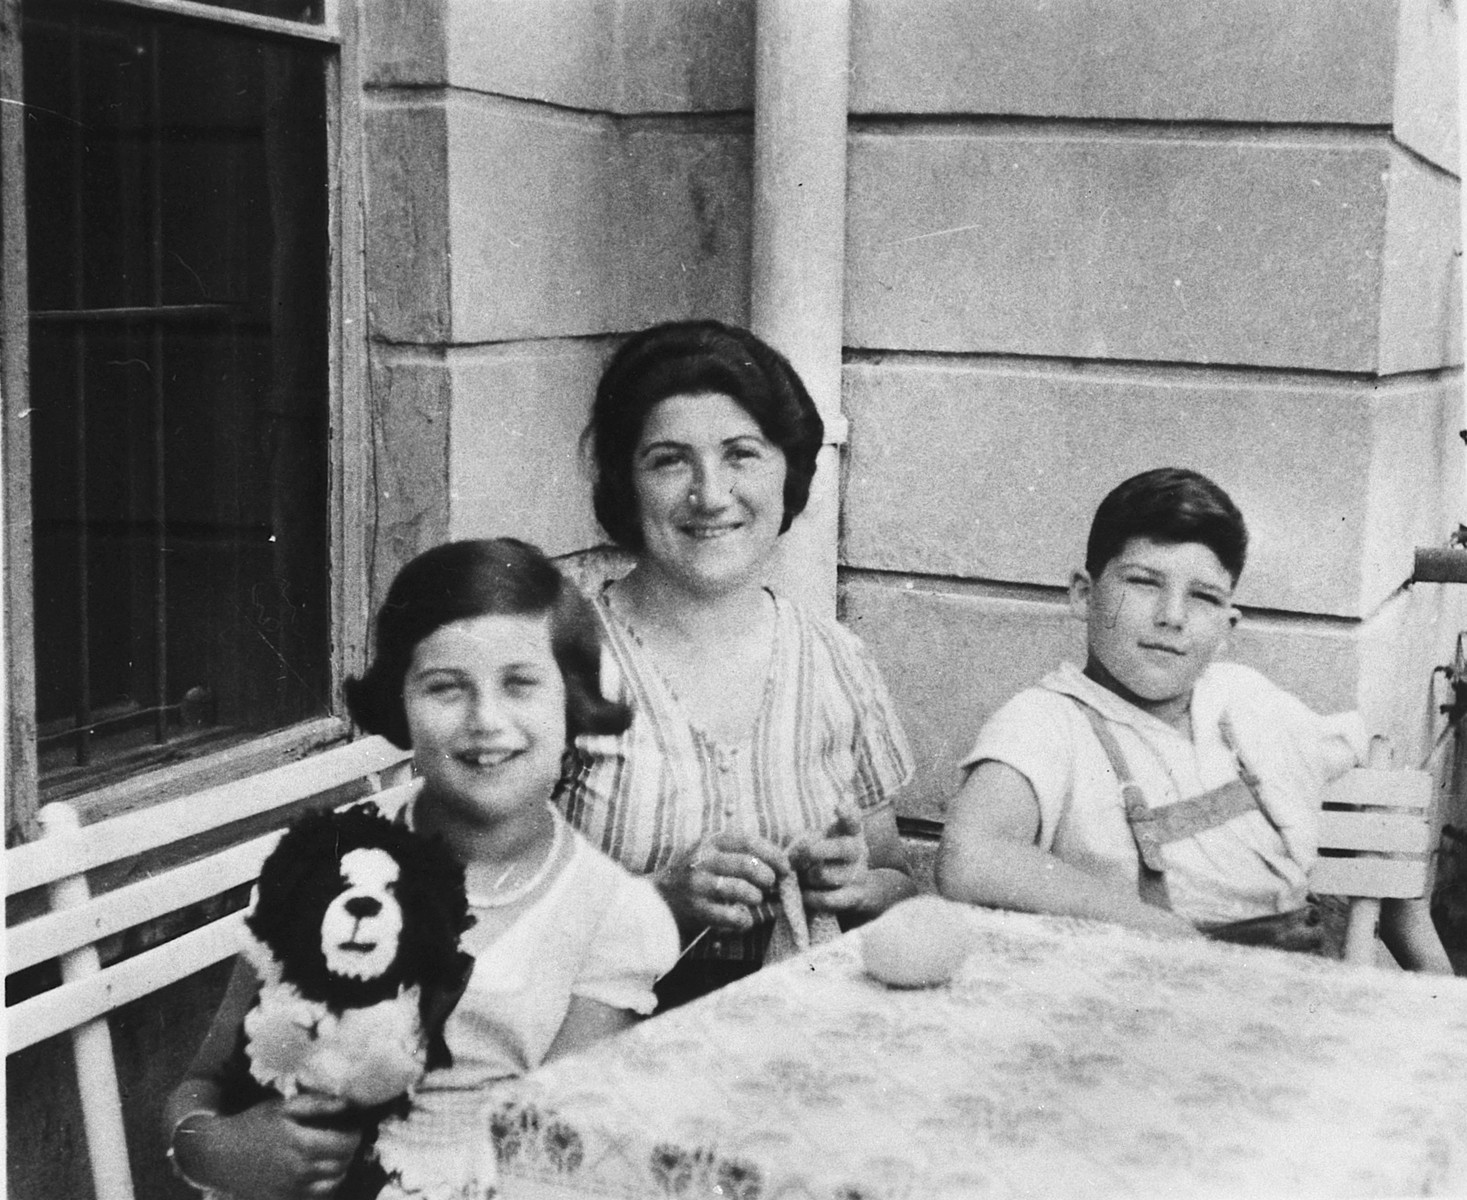 Portrait of an Austrian-Jewish family sitting around an outdoor table.

Pictured from left to right are Susi, Olga, and Herbert Popper.